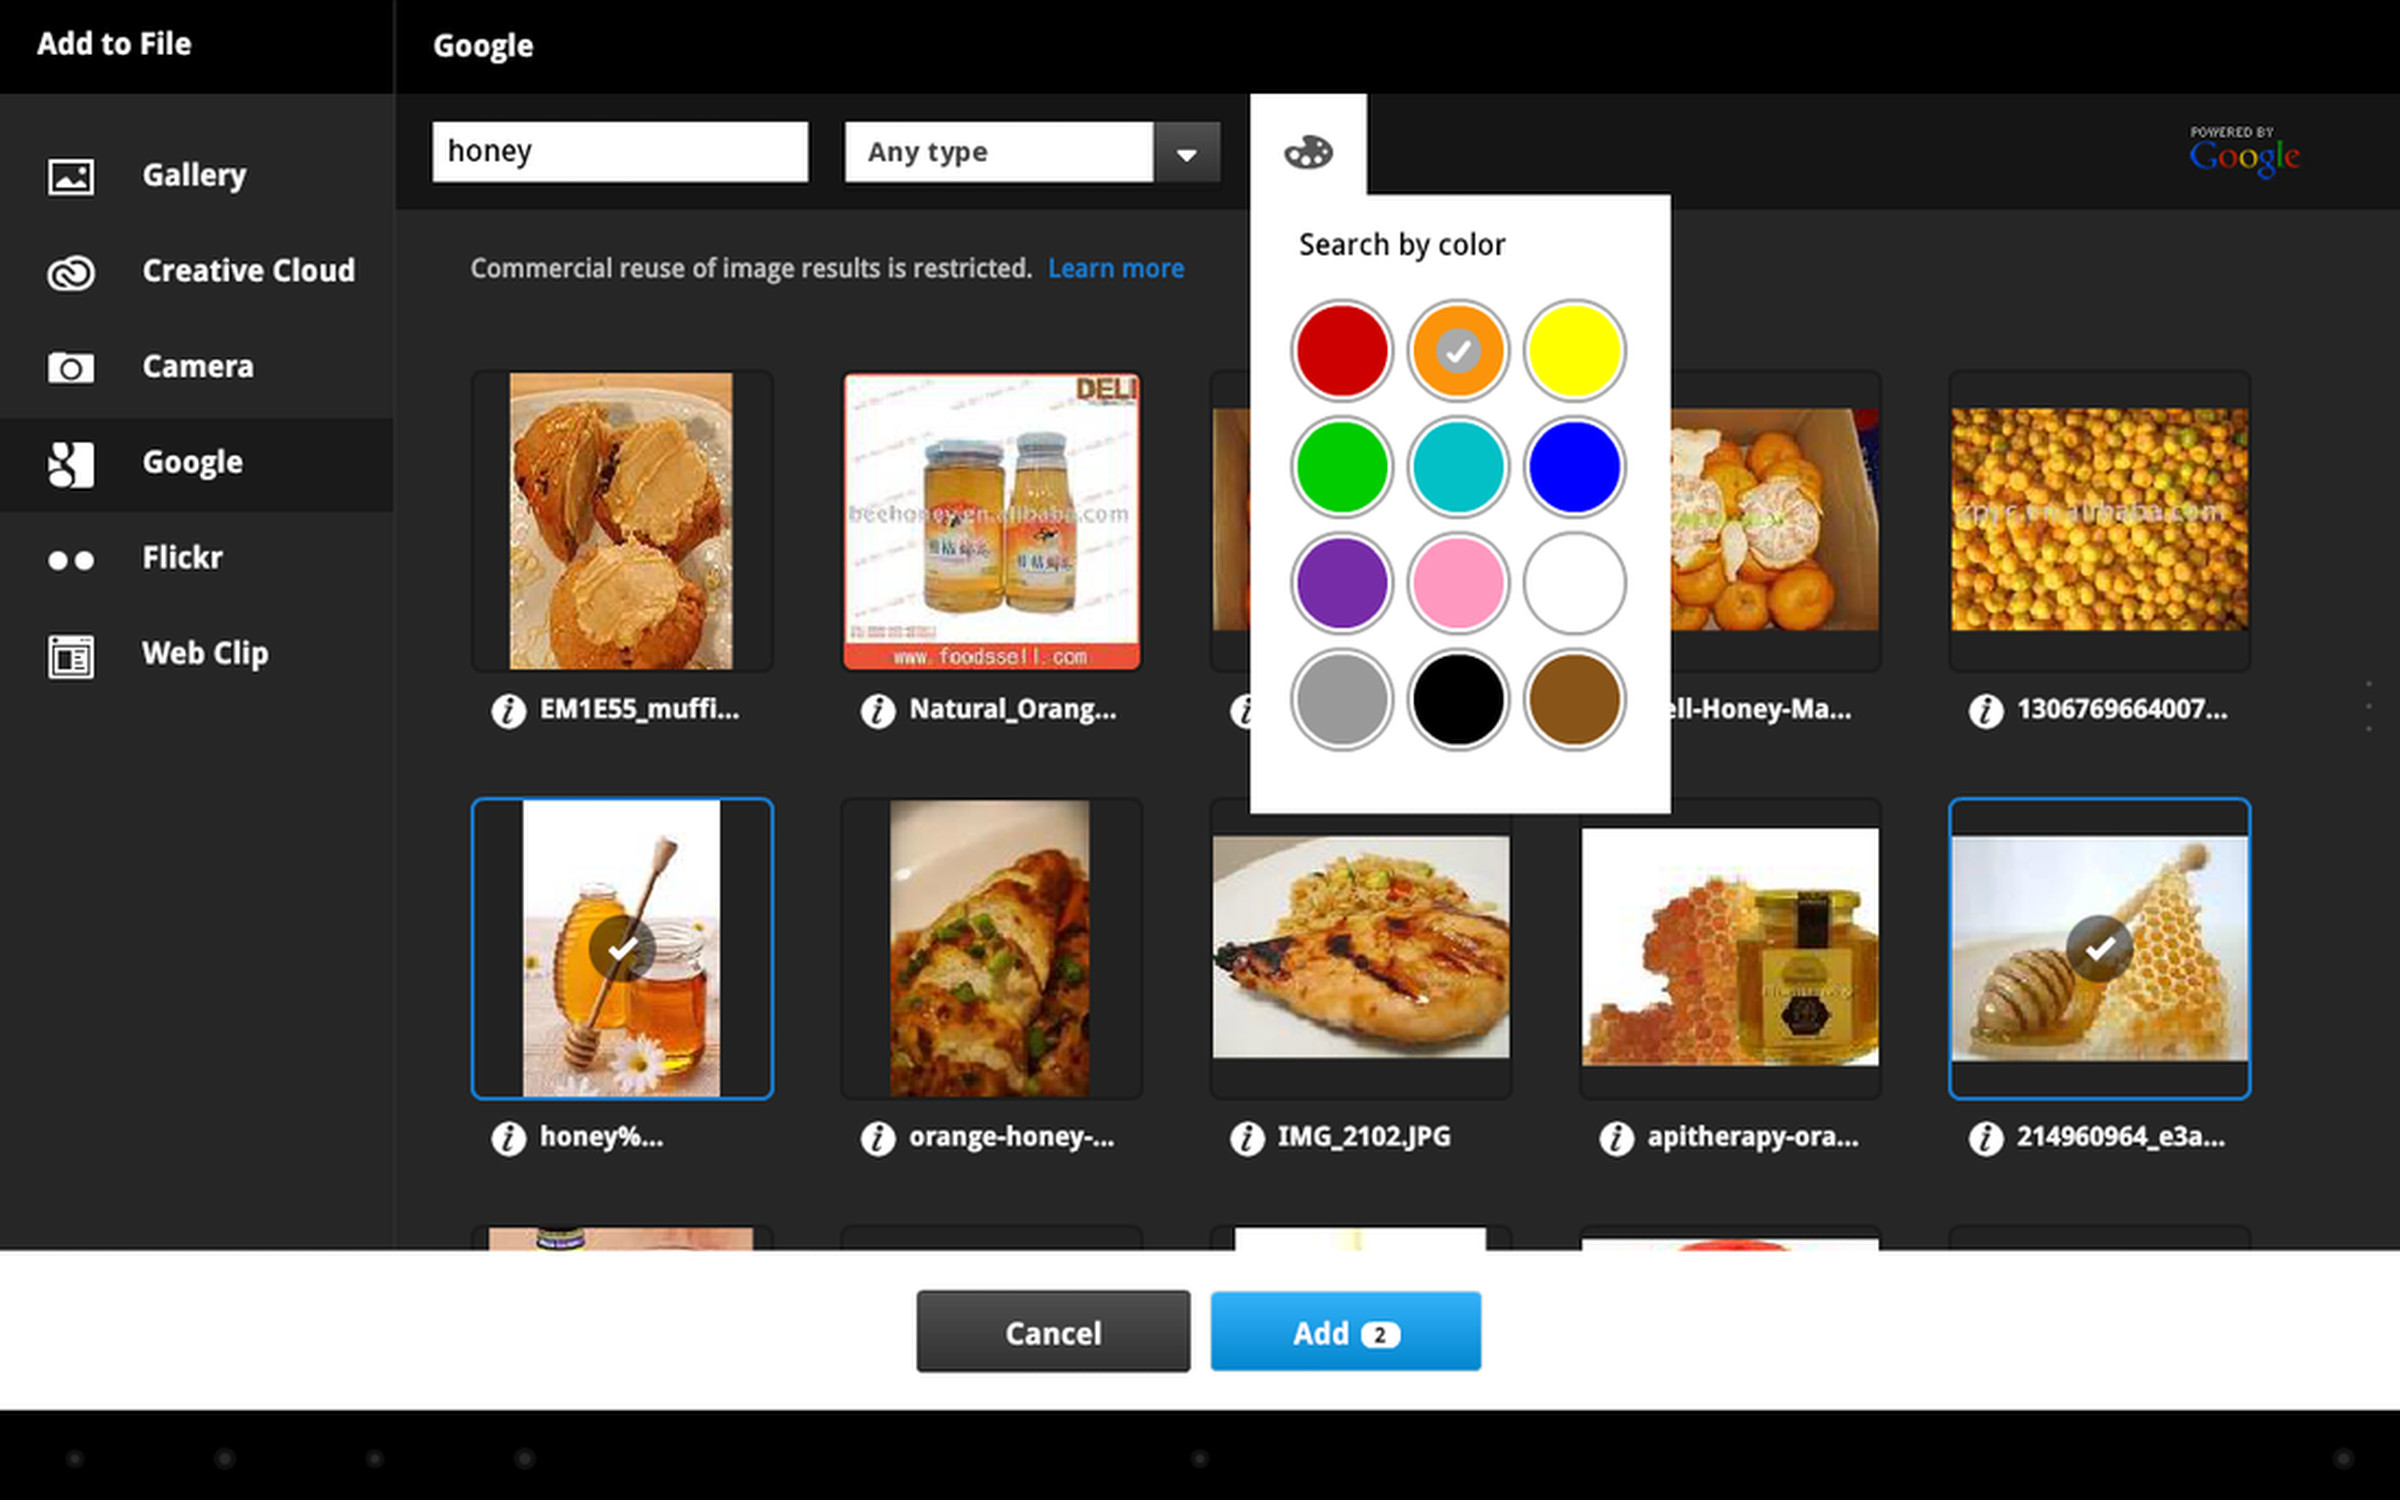 Adobe Touch Apps gallery